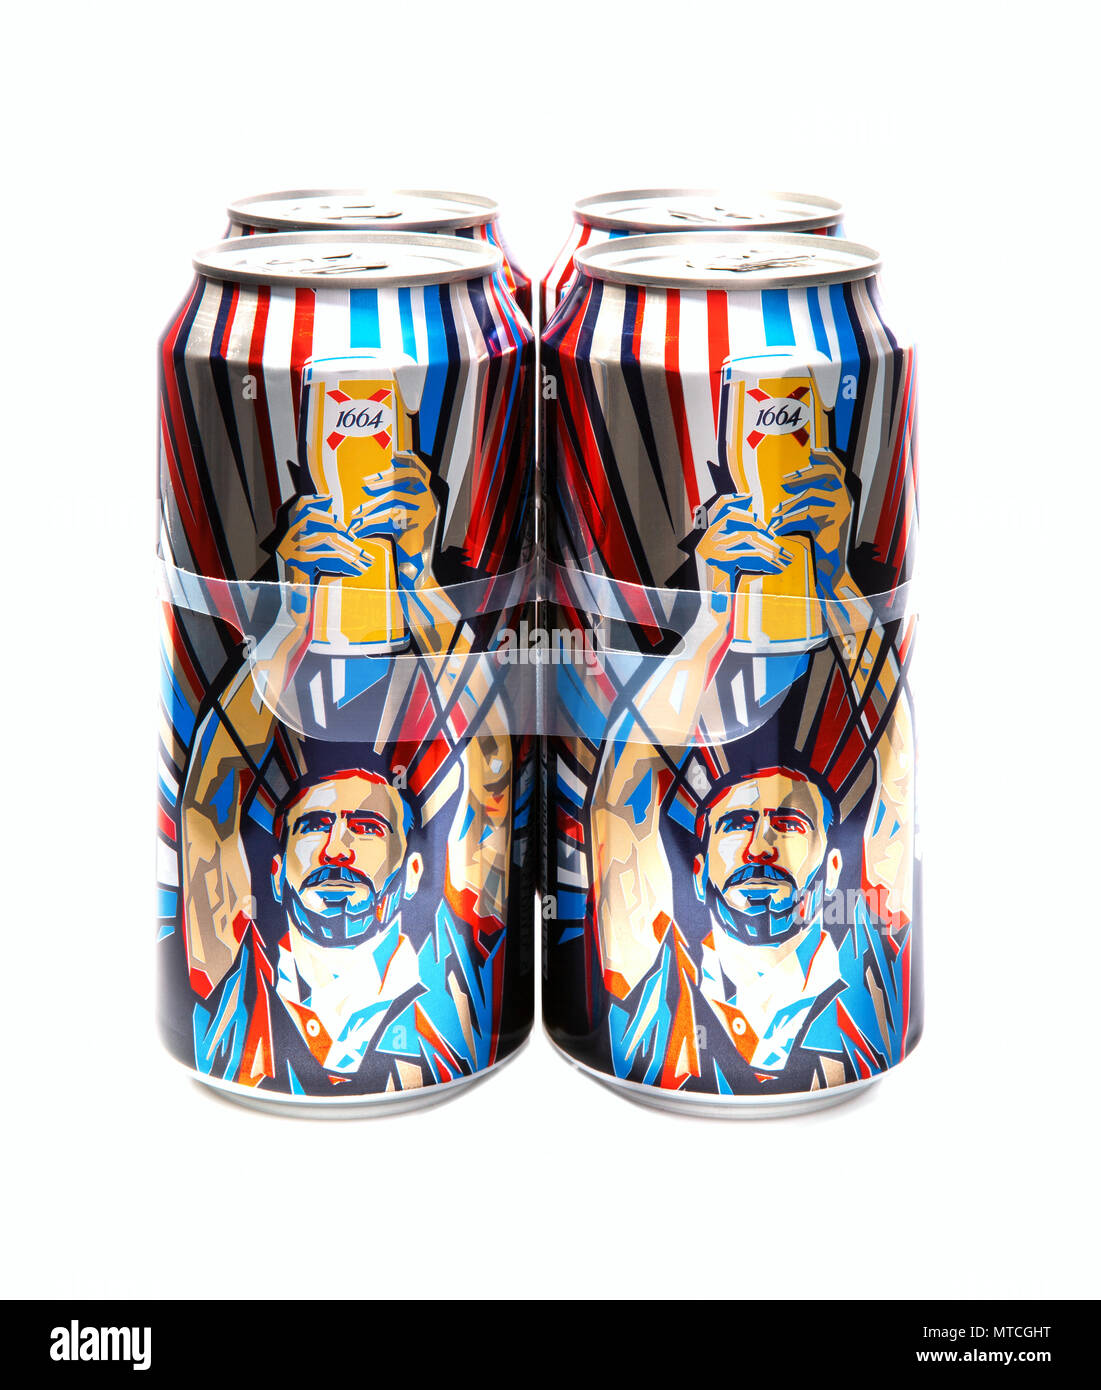 SWINDON, UK - MAY 13, 2018: 4 Cans of Kronenbourg 1664 limited edition Eric Cantona pour la victoire lager on a white background. Stock Photo